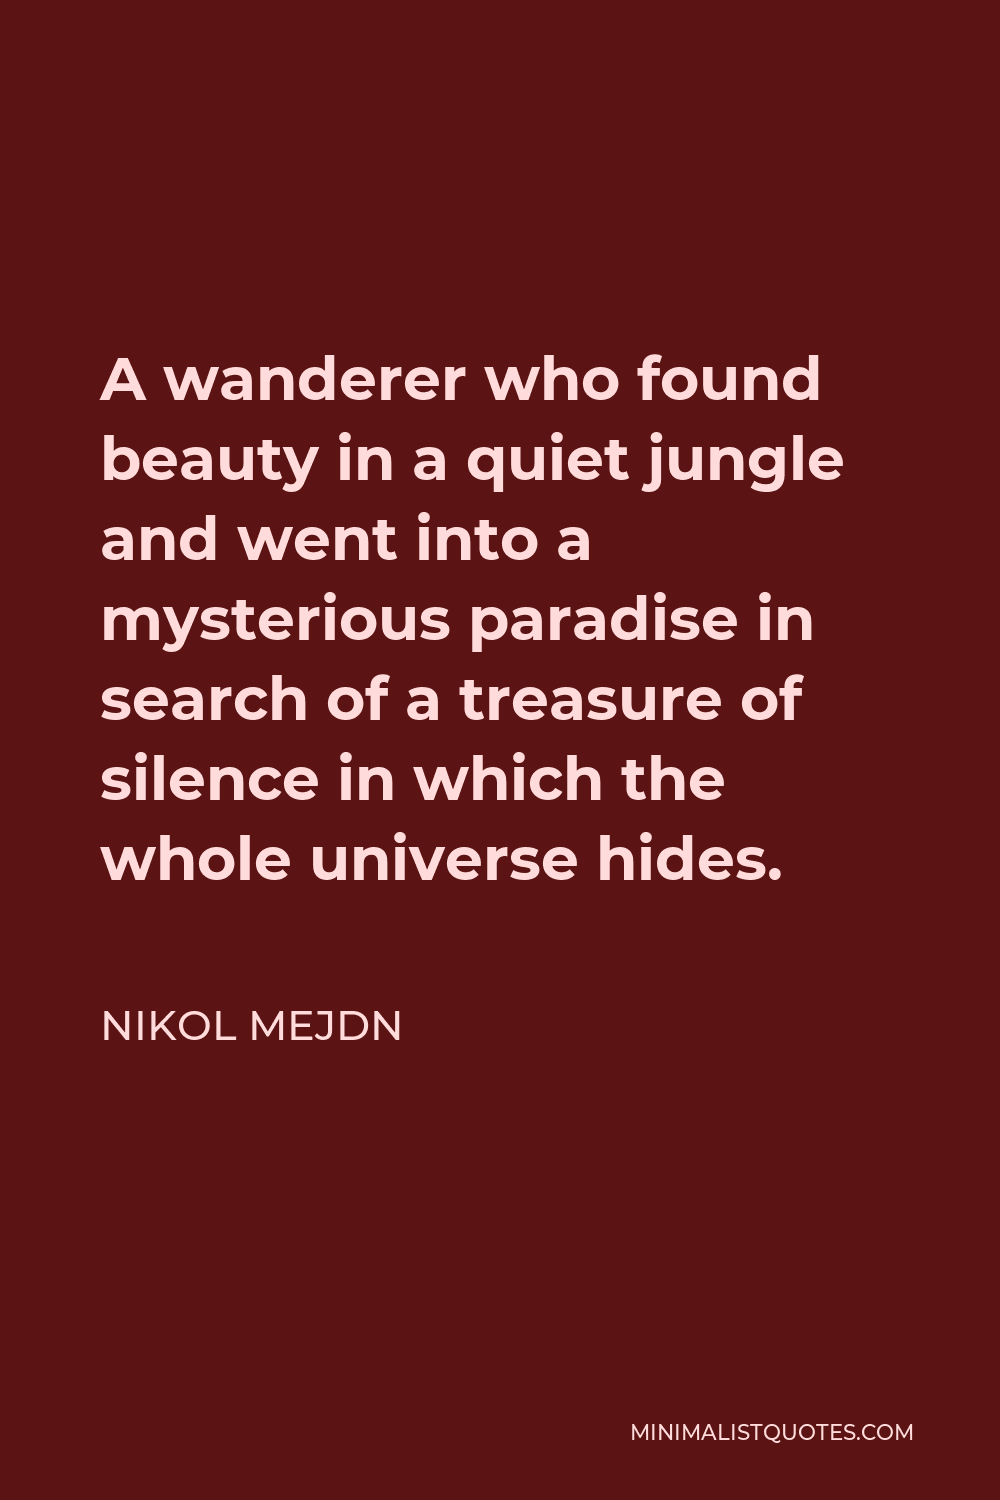 Nikol Mejdn Quote - A wanderer who found beauty in a quiet jungle and went into a mysterious paradise in search of a treasure of silence in which the whole universe hides.